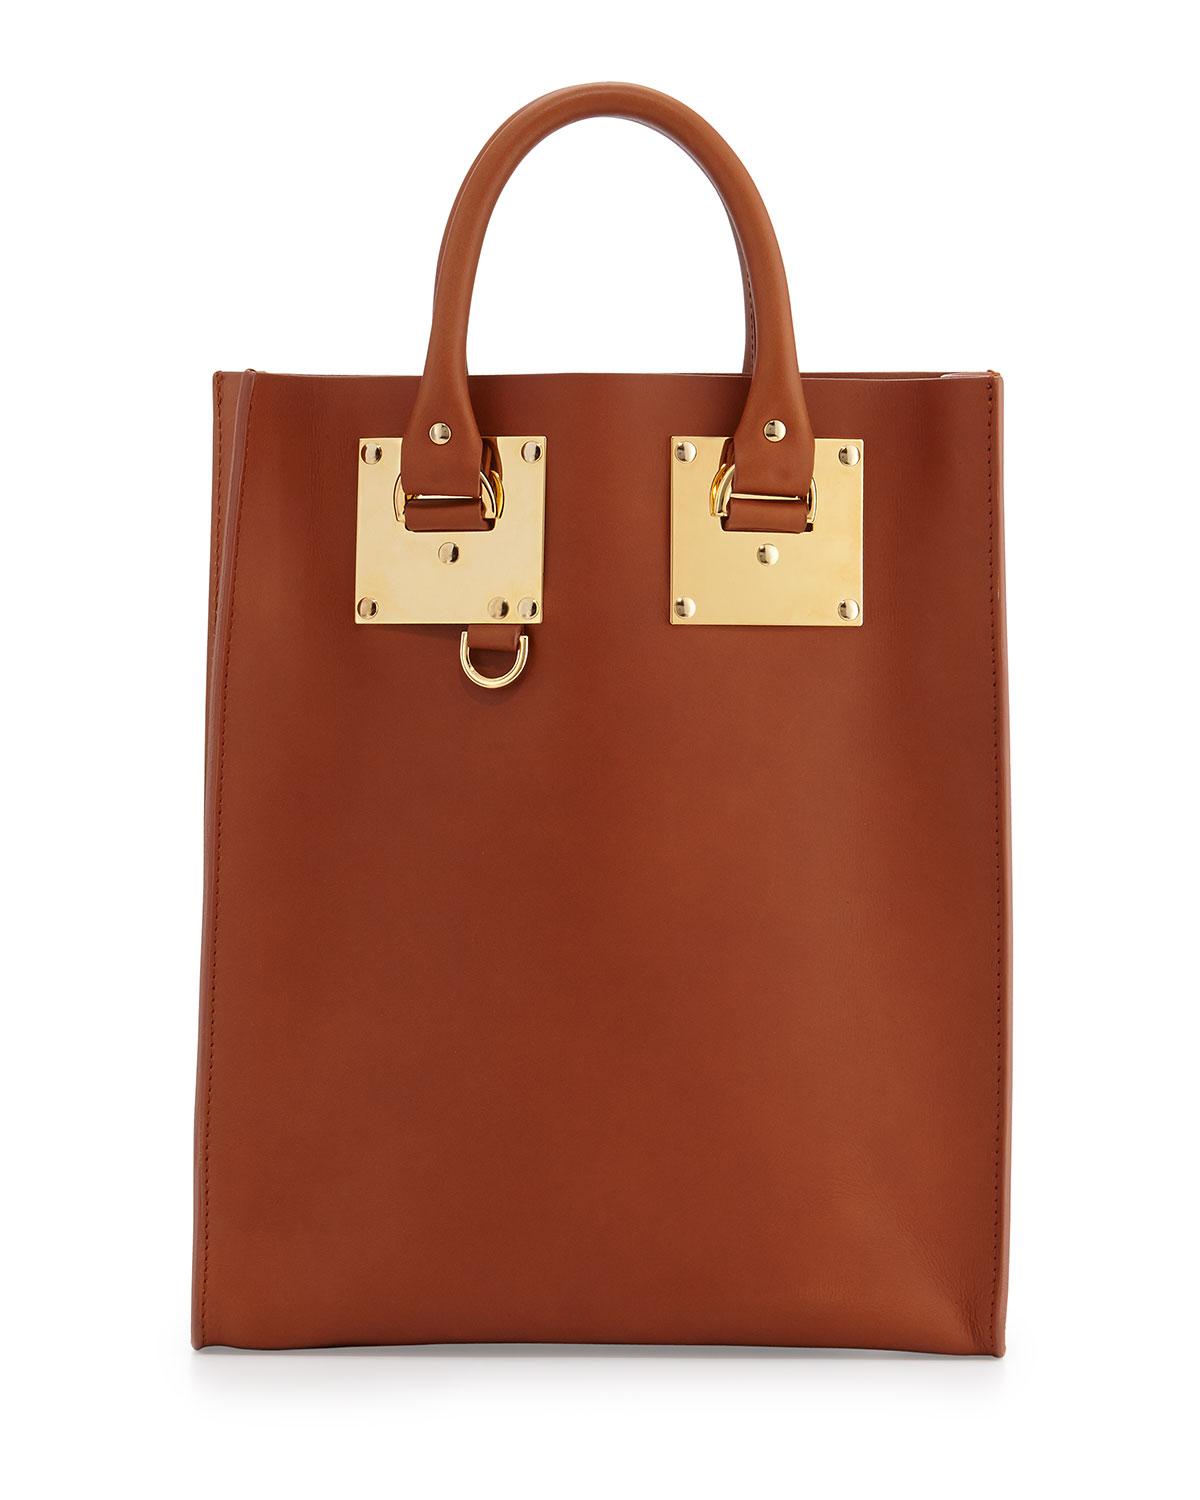 Lyst - Sophie Hulme Albion Mini Leather Tote Bag in Brown